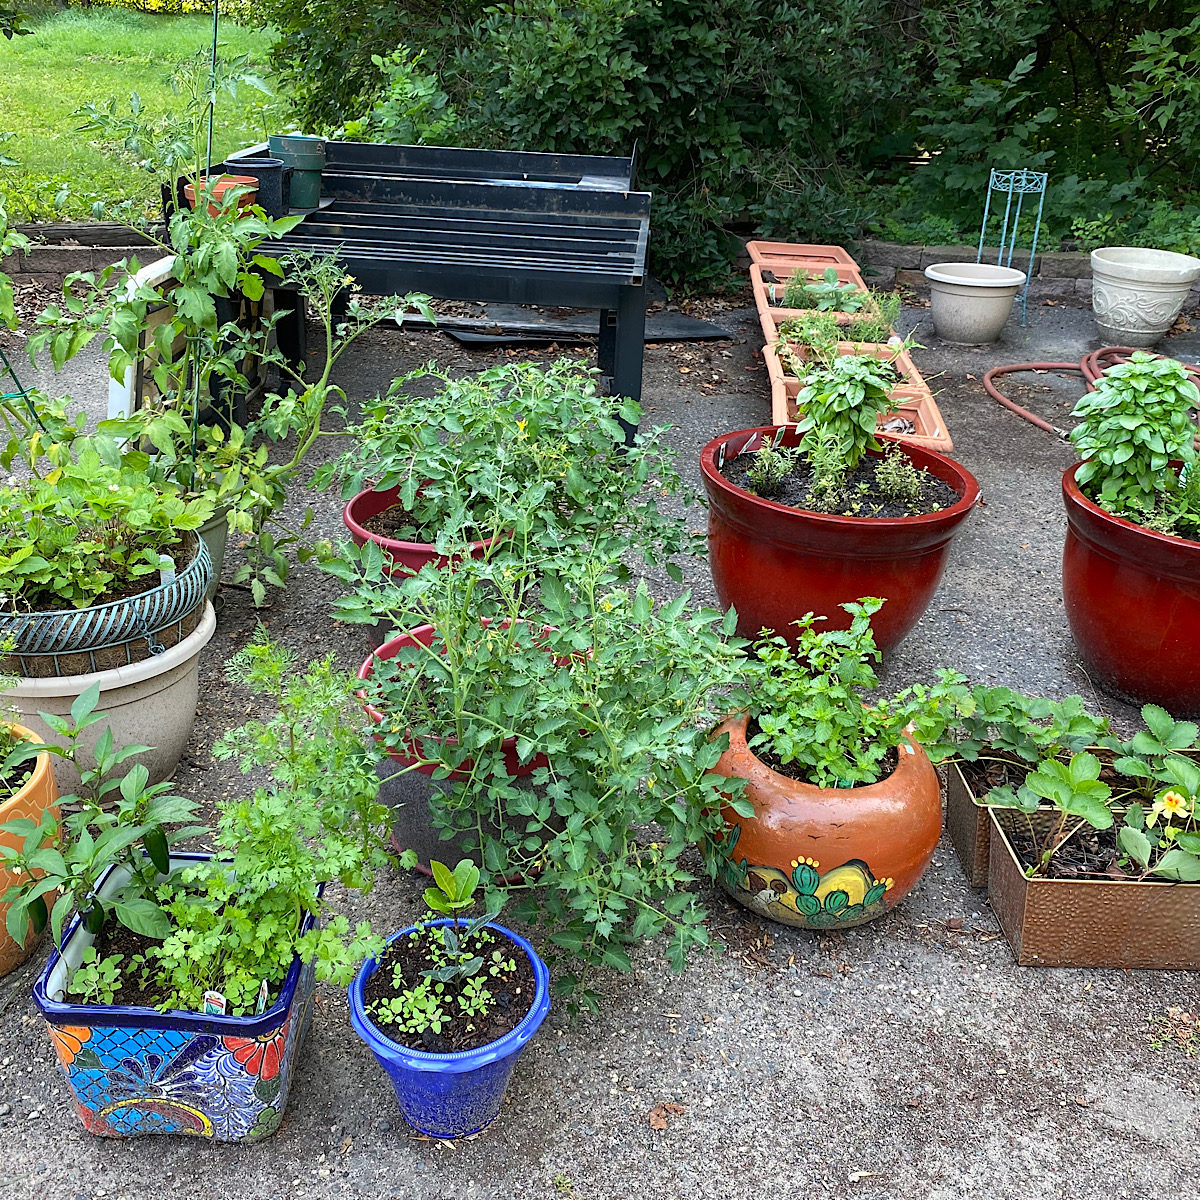 A variety of herbs and edibles growing in different size pots.